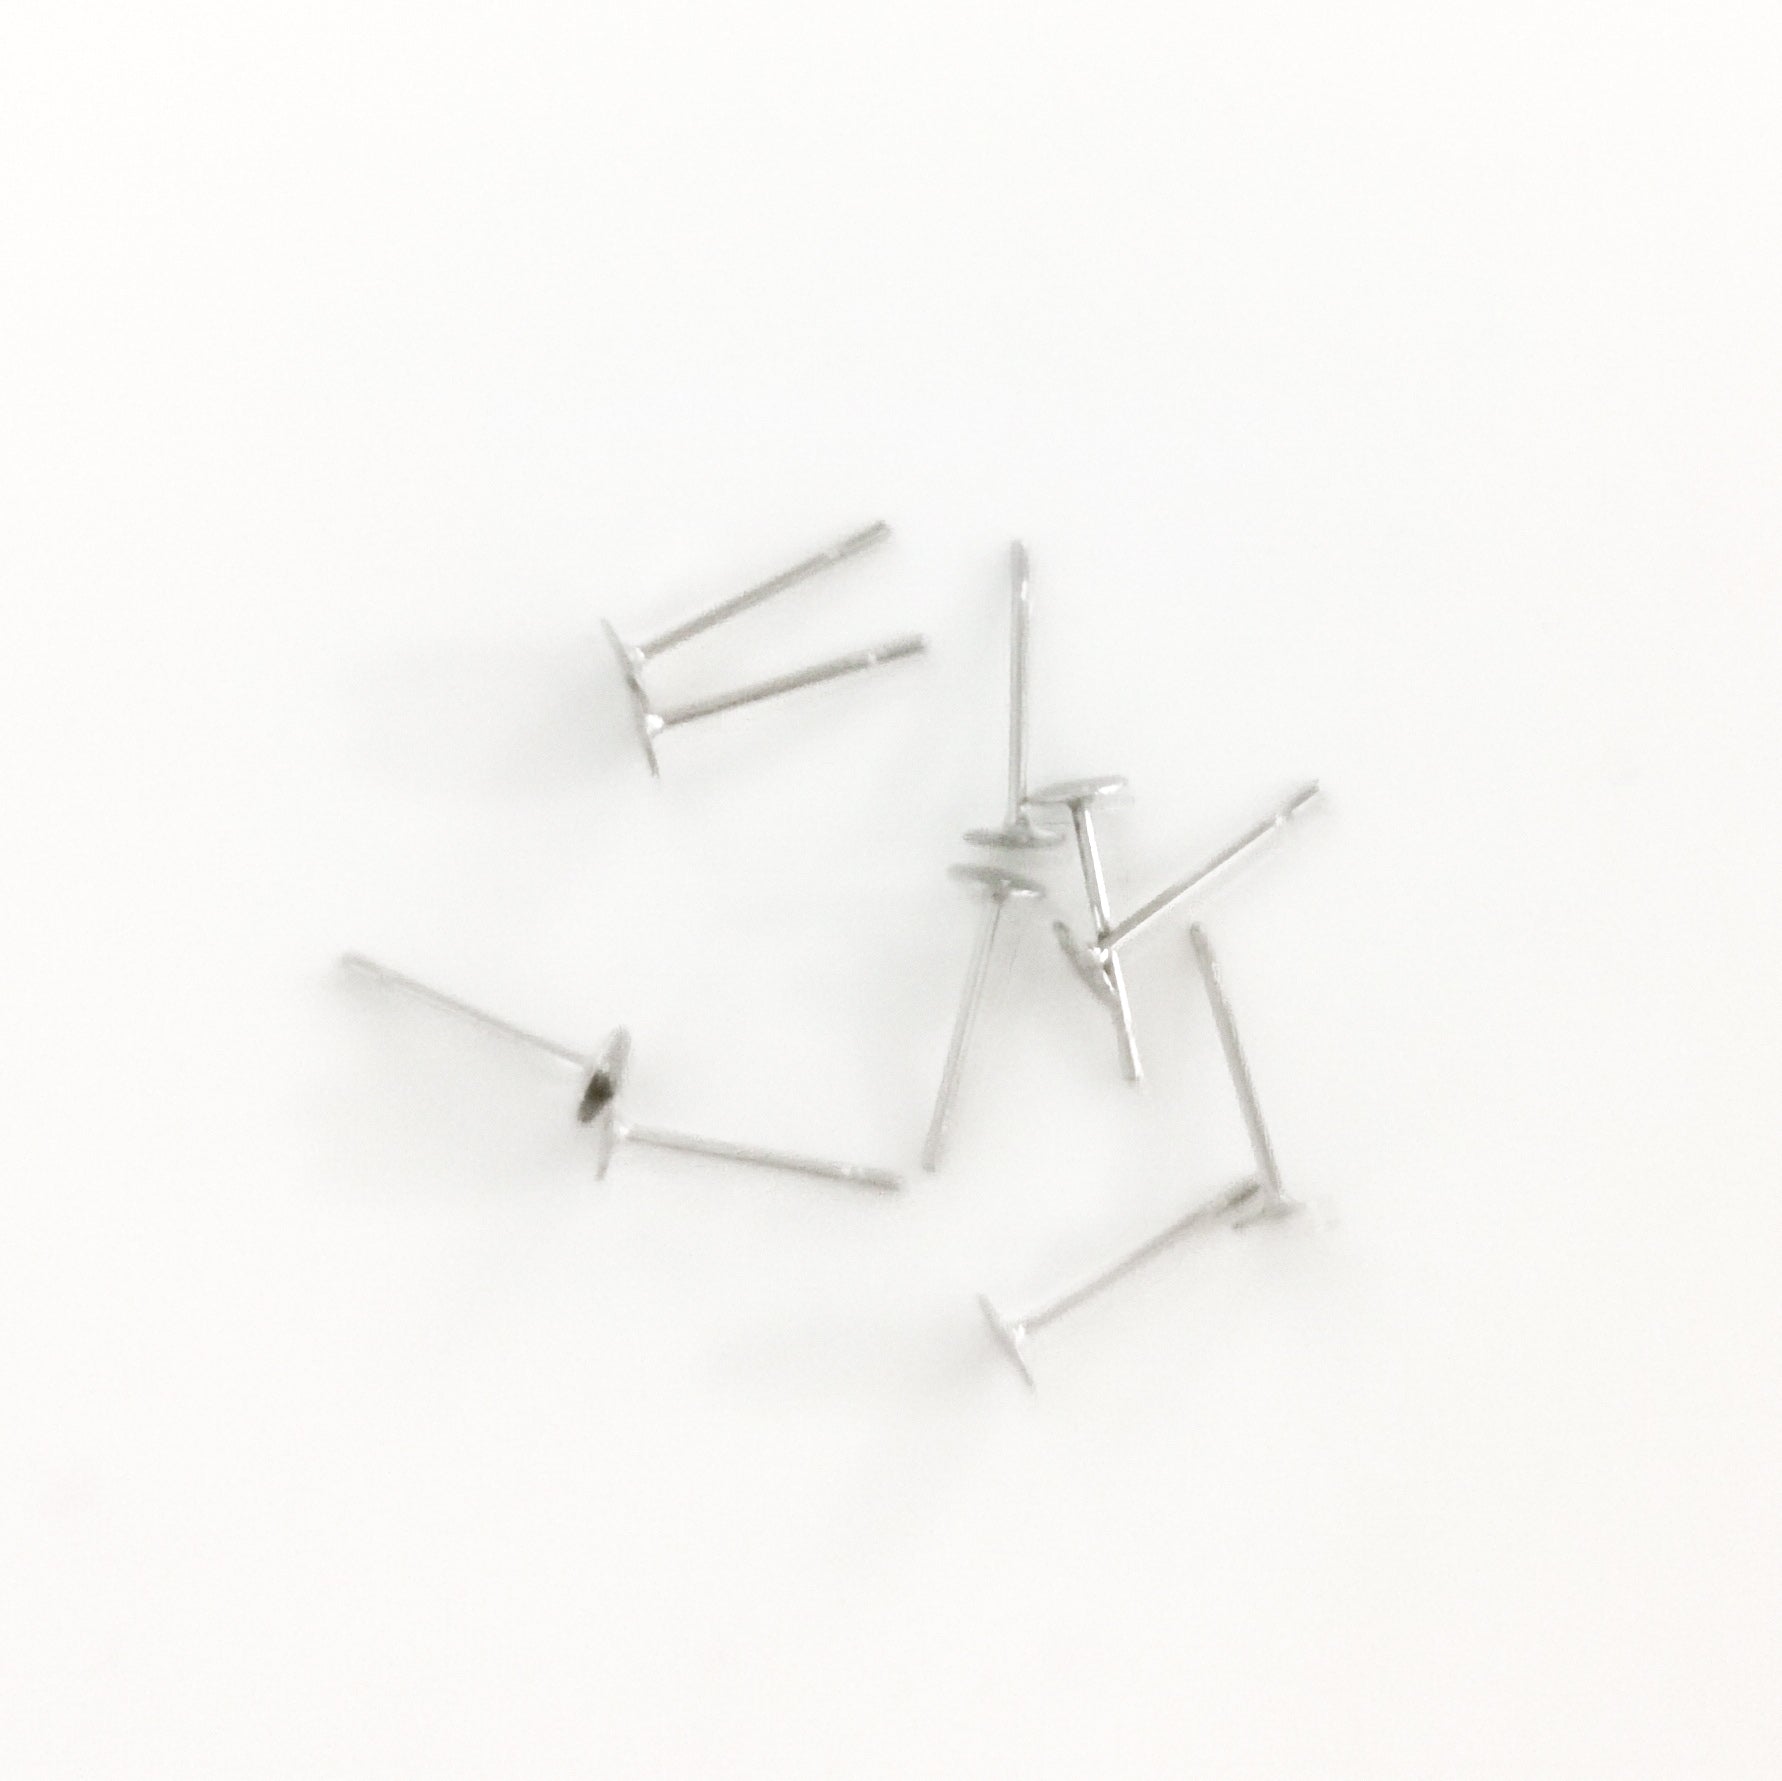 4mm Silver Stainless Steel Earring Posts - 100 pieces